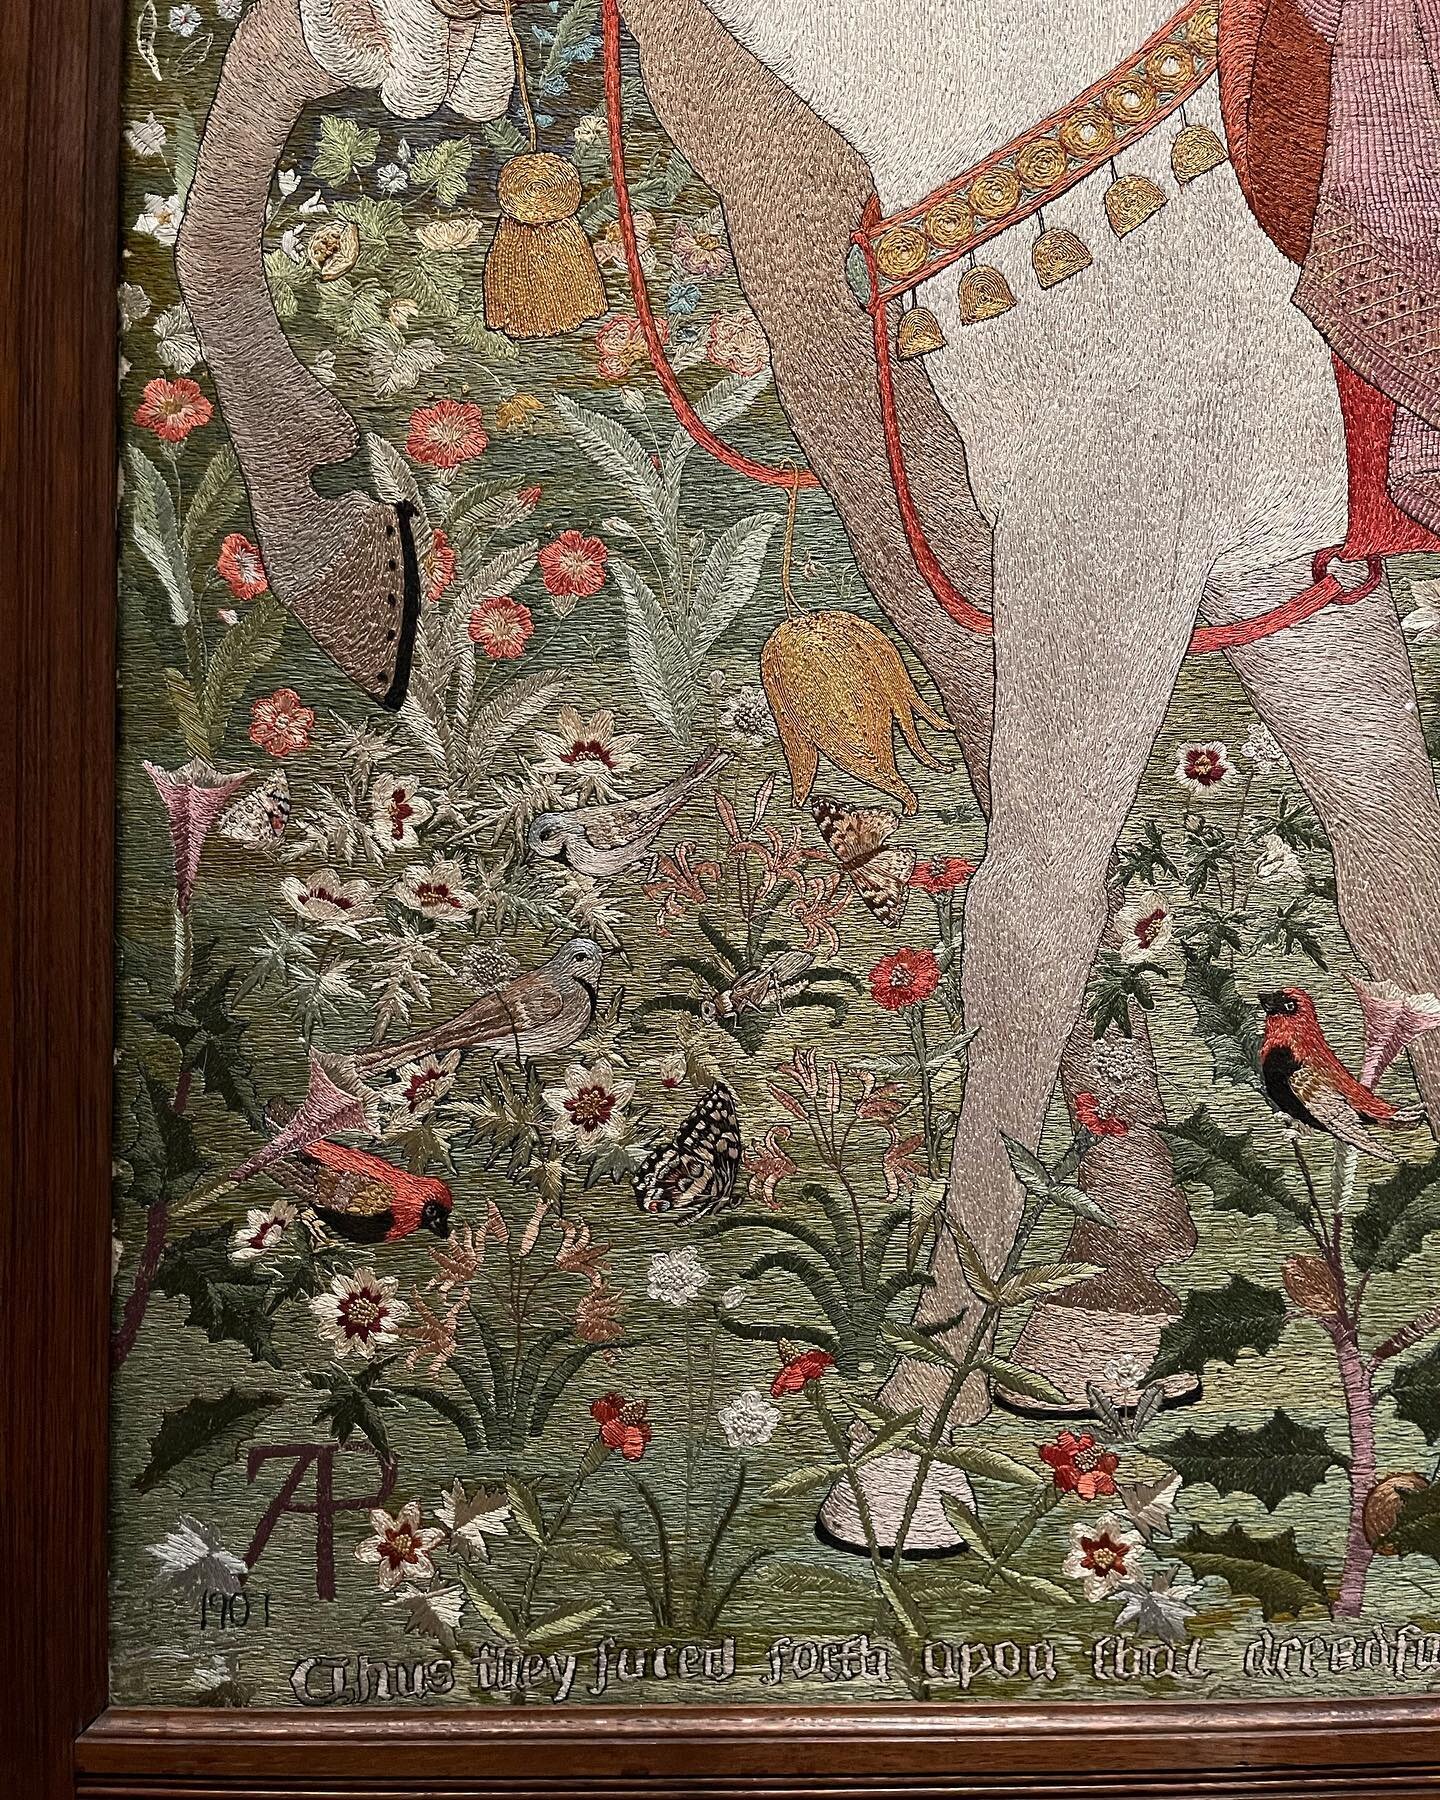 Visit to the @nationalmuseumsscotland or how the trail of William Burges led to Phoebe Traquair!

Photos 1-2: embroidered tapestry by Phoebe Traquair
Photos 3-5: piano decorated by Phoebe Traquair
Photo 6: ceramics designed by William Burges

#phoebe